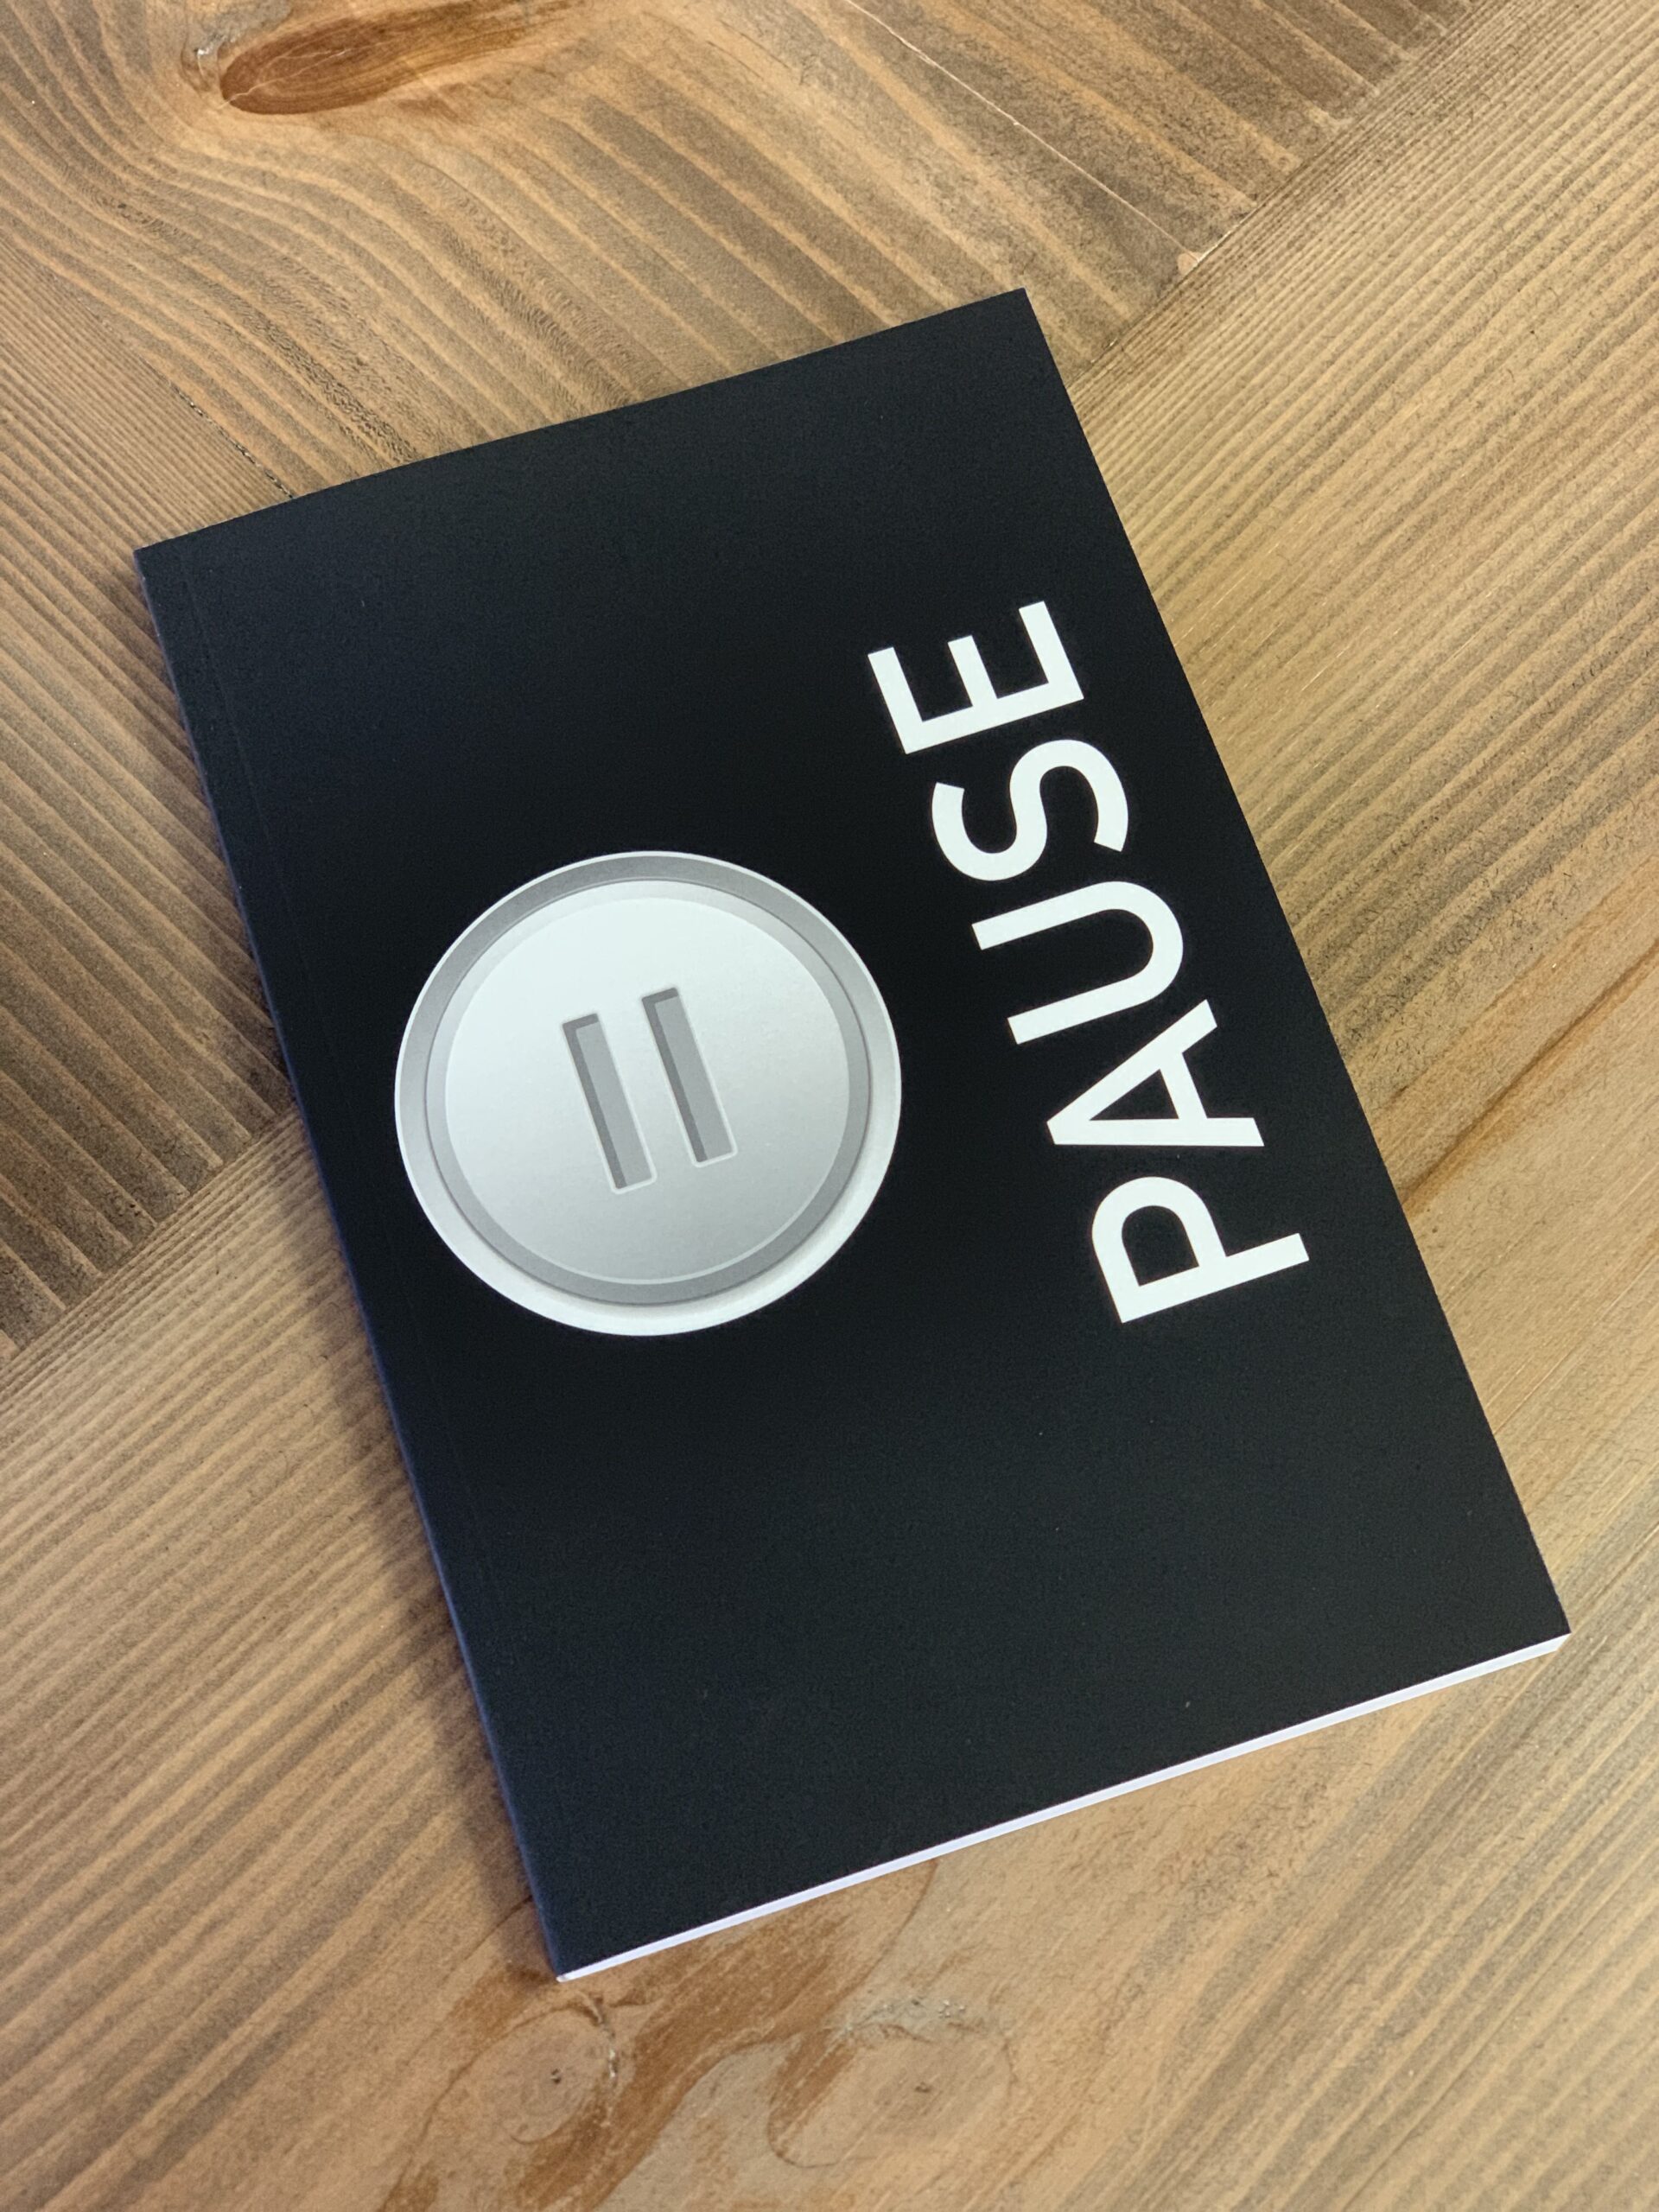 PAUSE || A Diversity, Equity, and Inclusion Journal